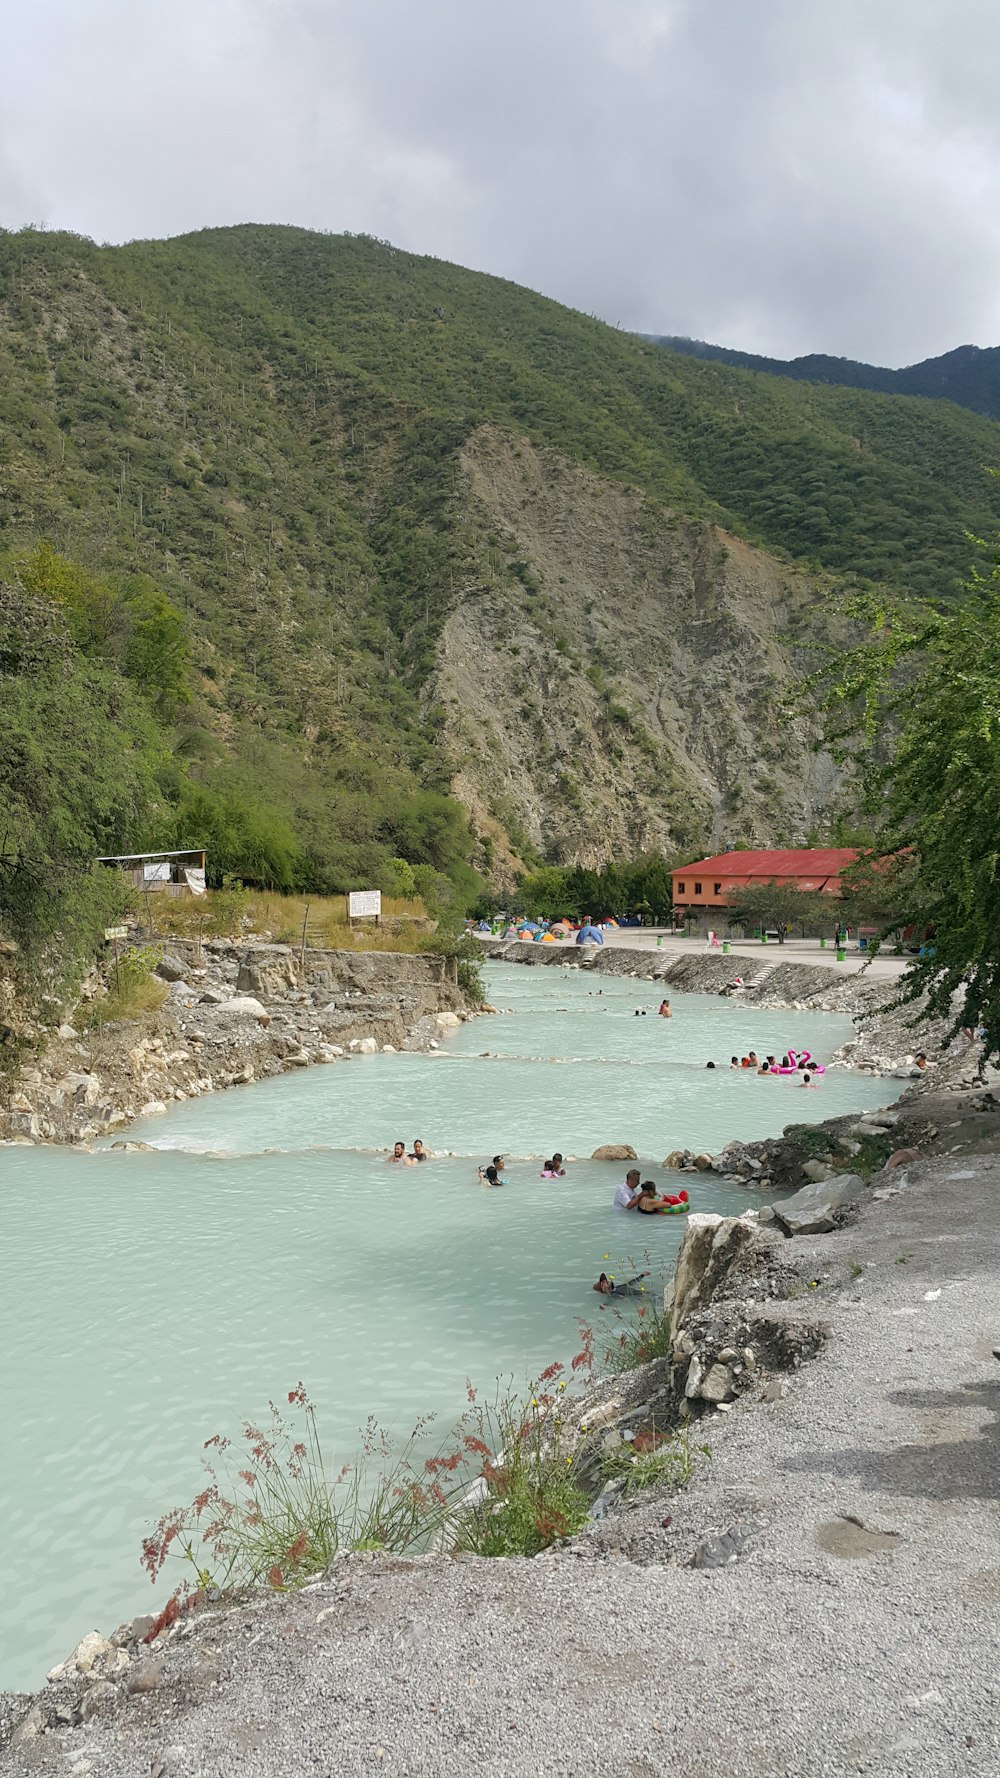 people are swimming in a river near a mountain